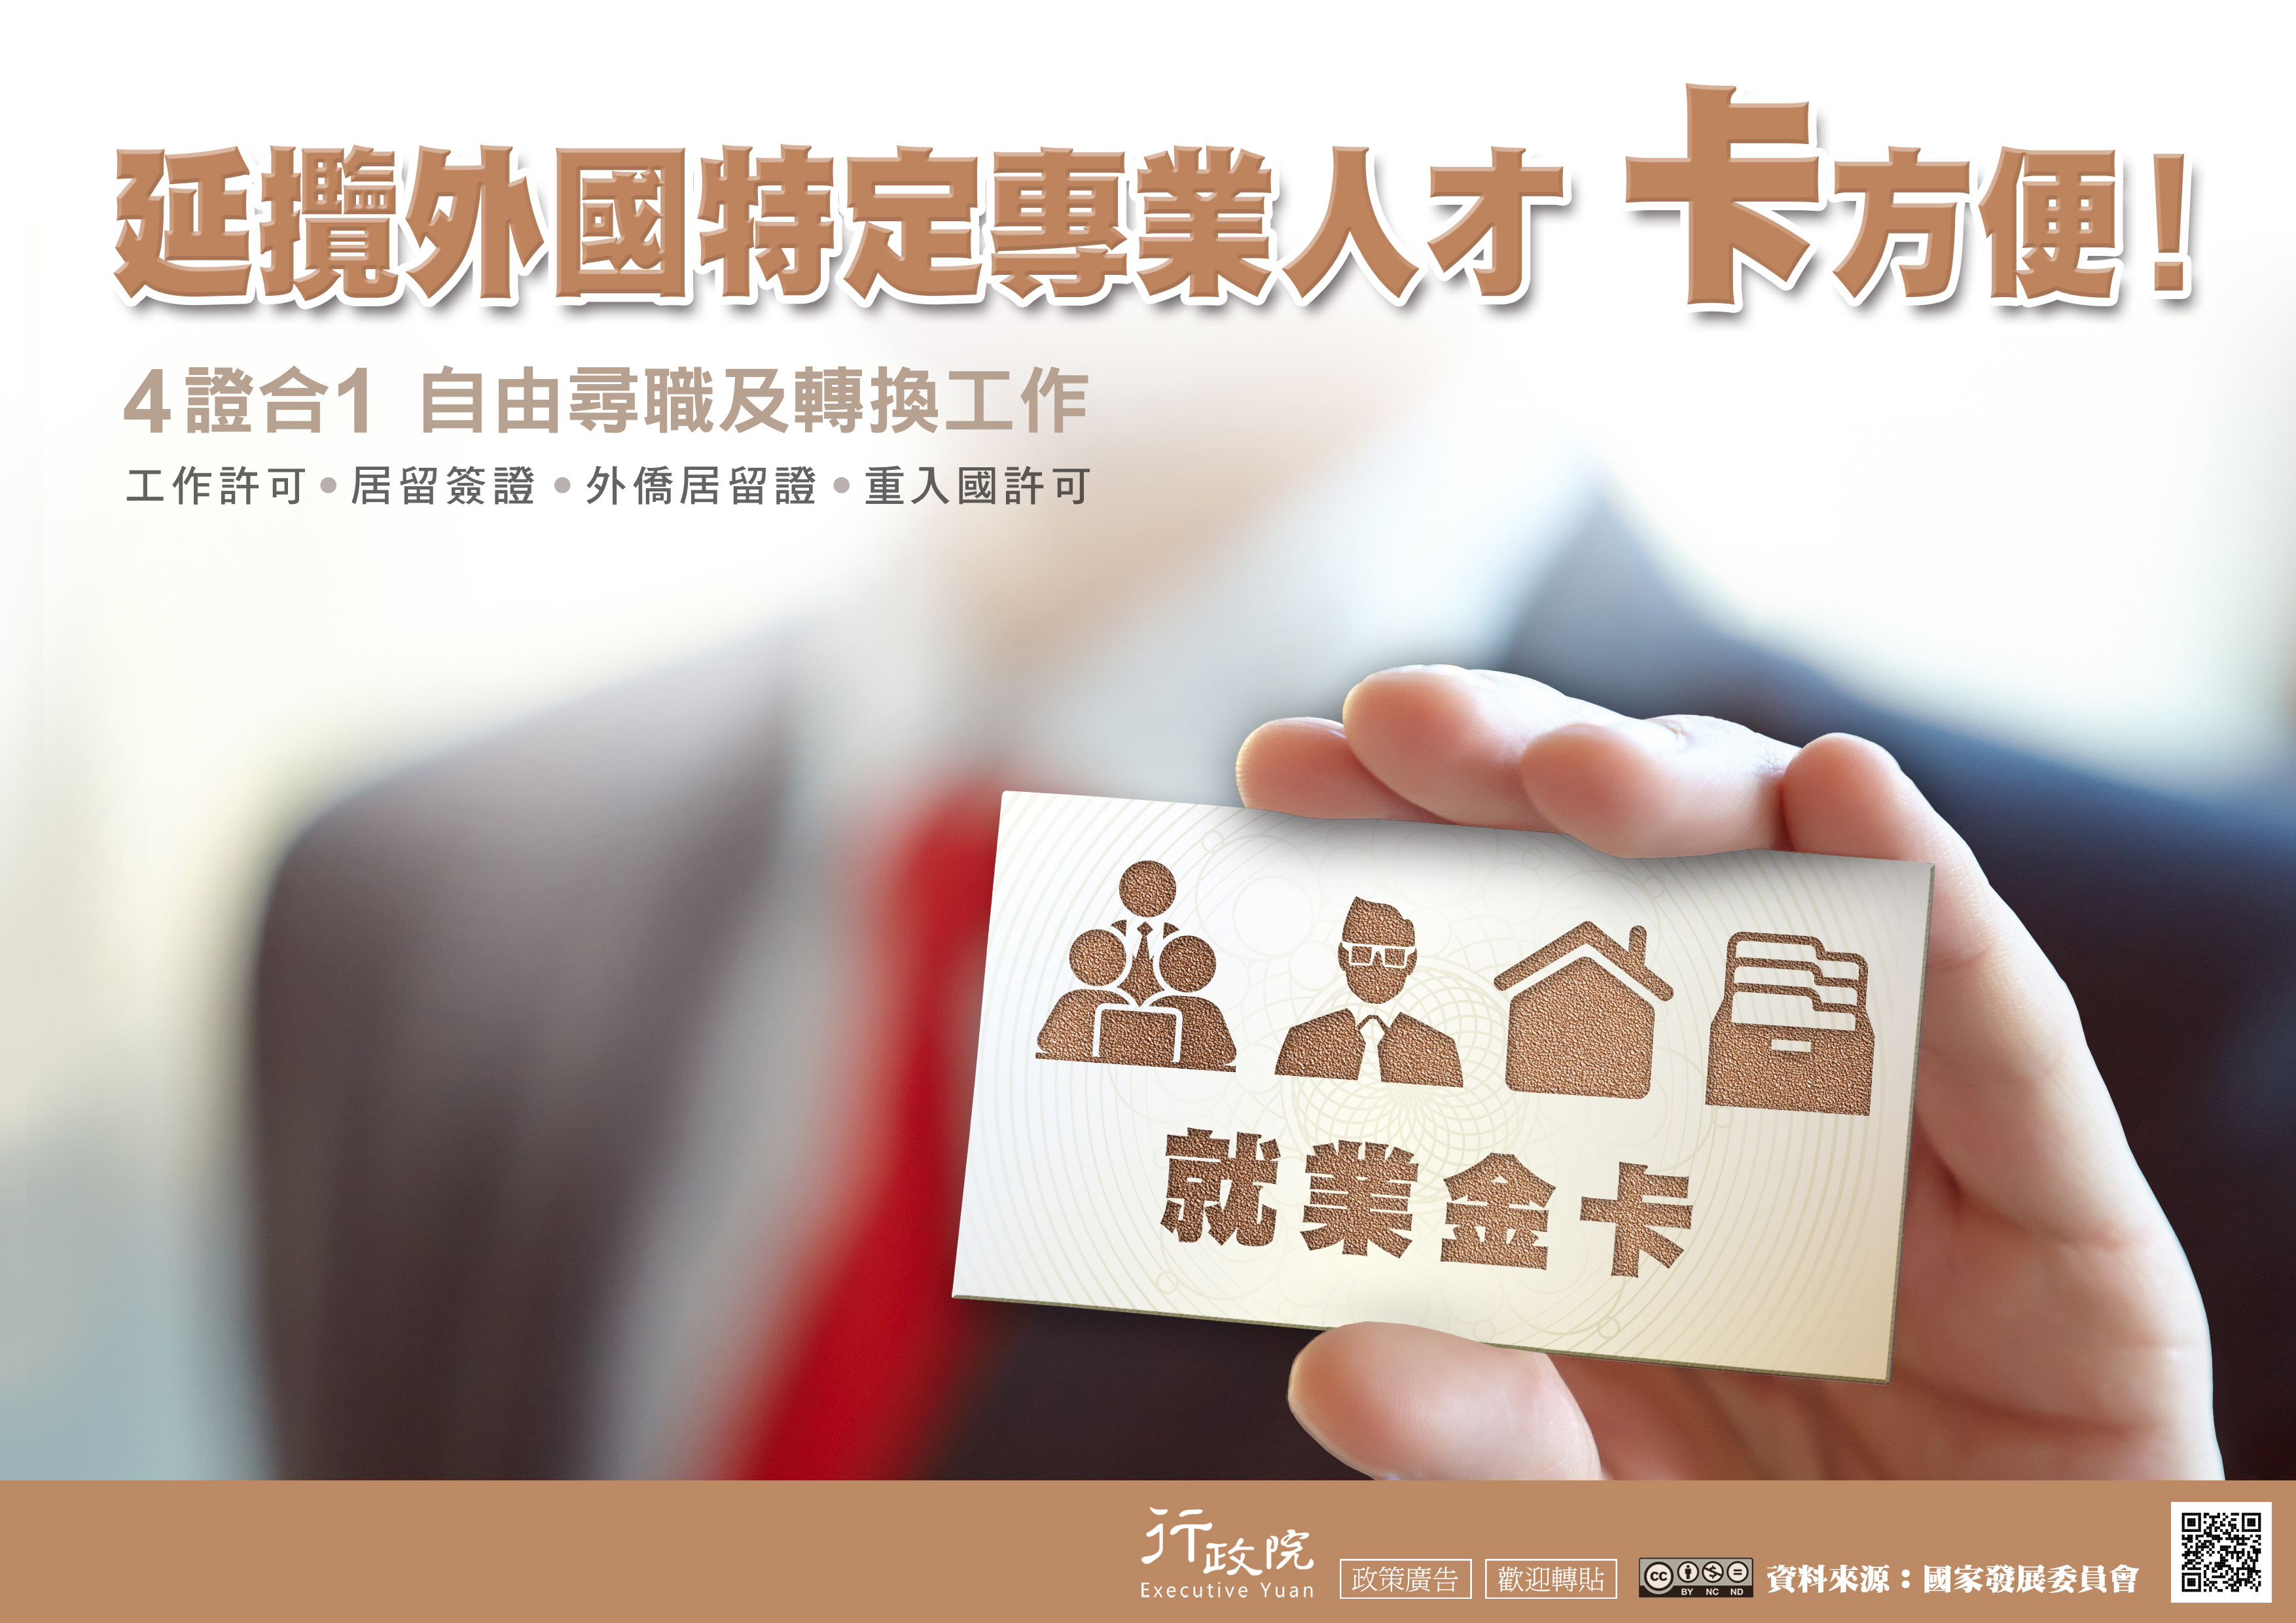 How can foreign professional talents come to Taiwan? Learn more about the "Taiwan Employment Gold Card". (Photo / Provided by the Executive Yuan)